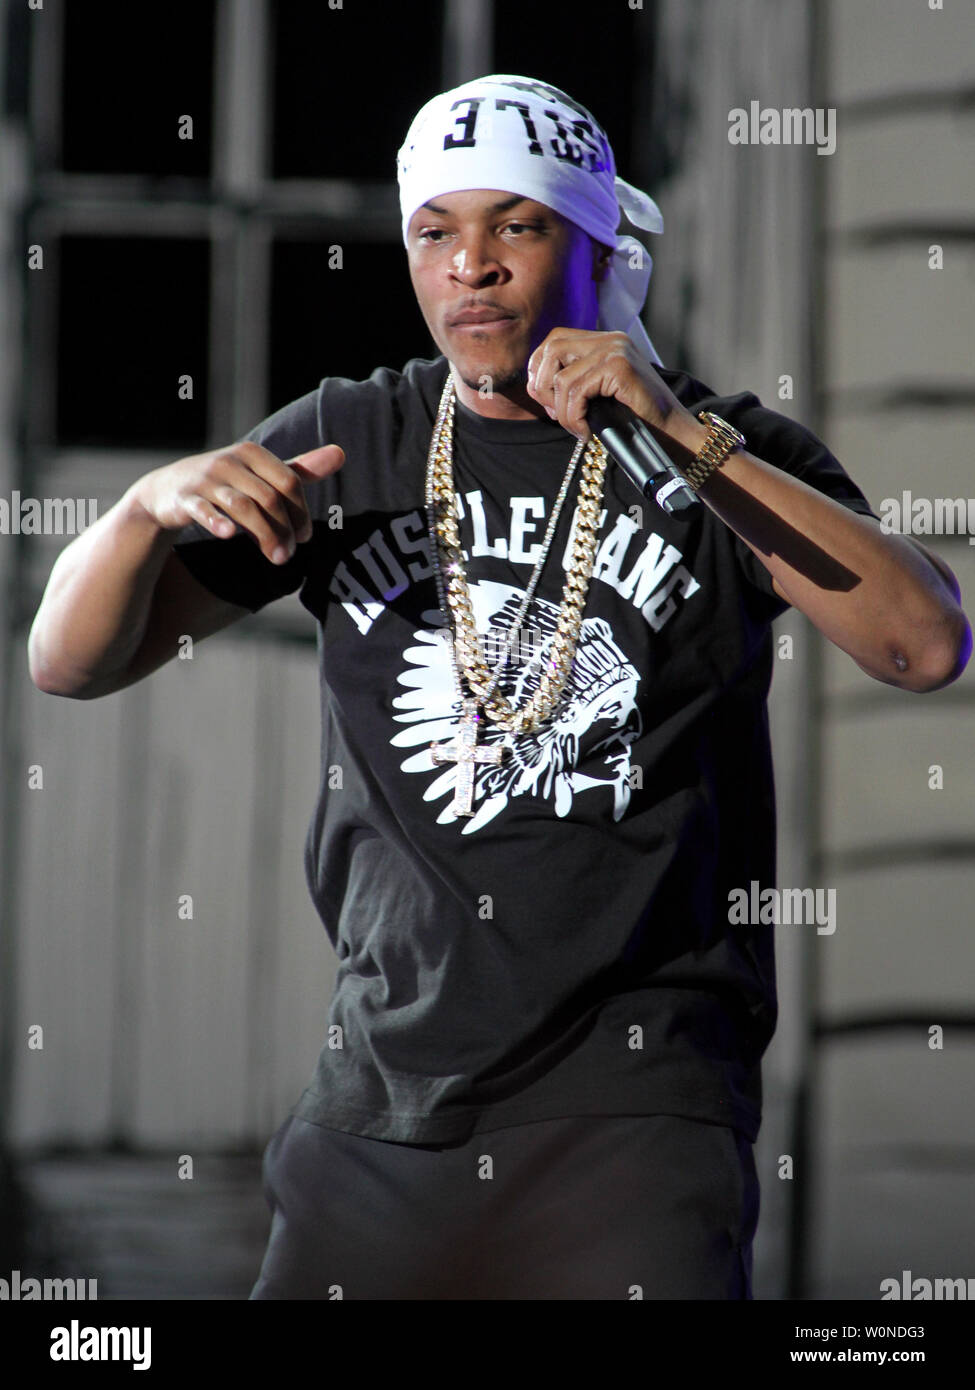 T.I. performs in concert on Lil Wayne's America's Most Wanted tour at the Cruzan Amphitheatre in West Palm Beach, Florida on July 14, 2013. UPI/Michael Bush Stock Photo